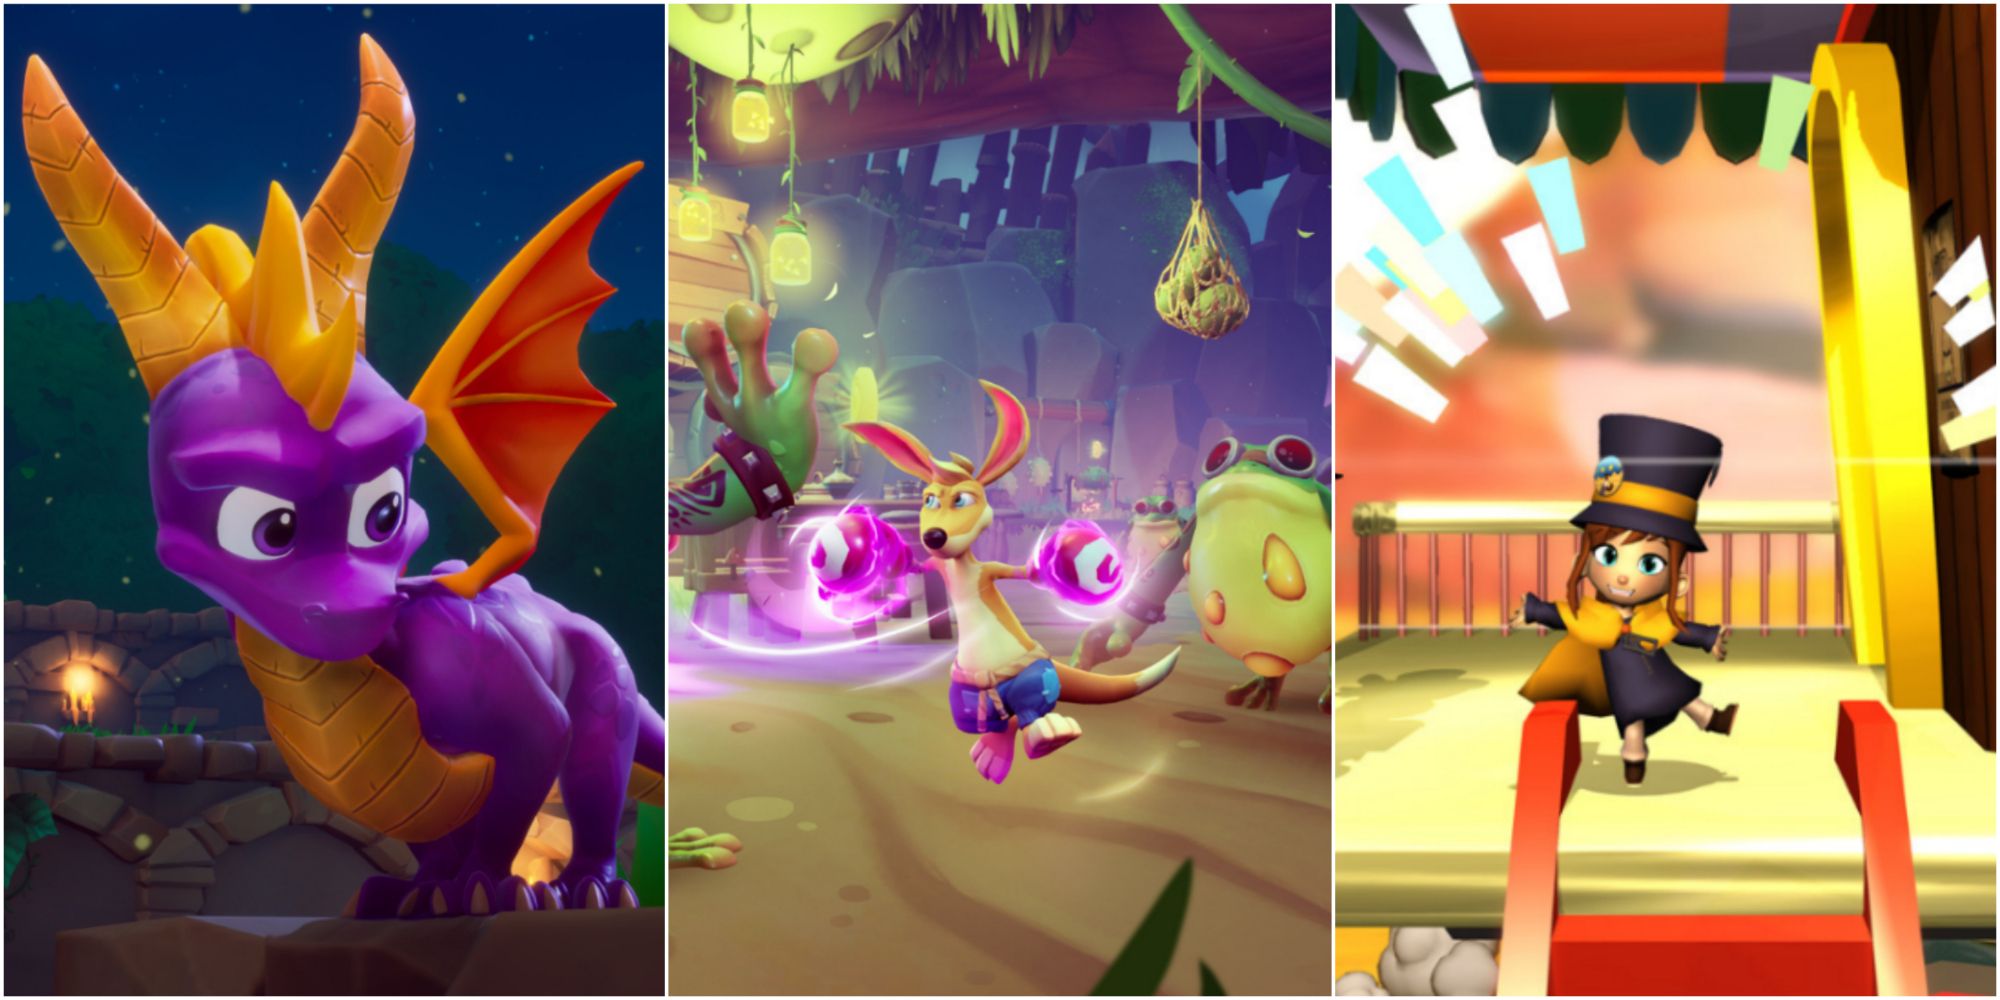 spyro in action, kao pummeling a frog, hat kid on train featured